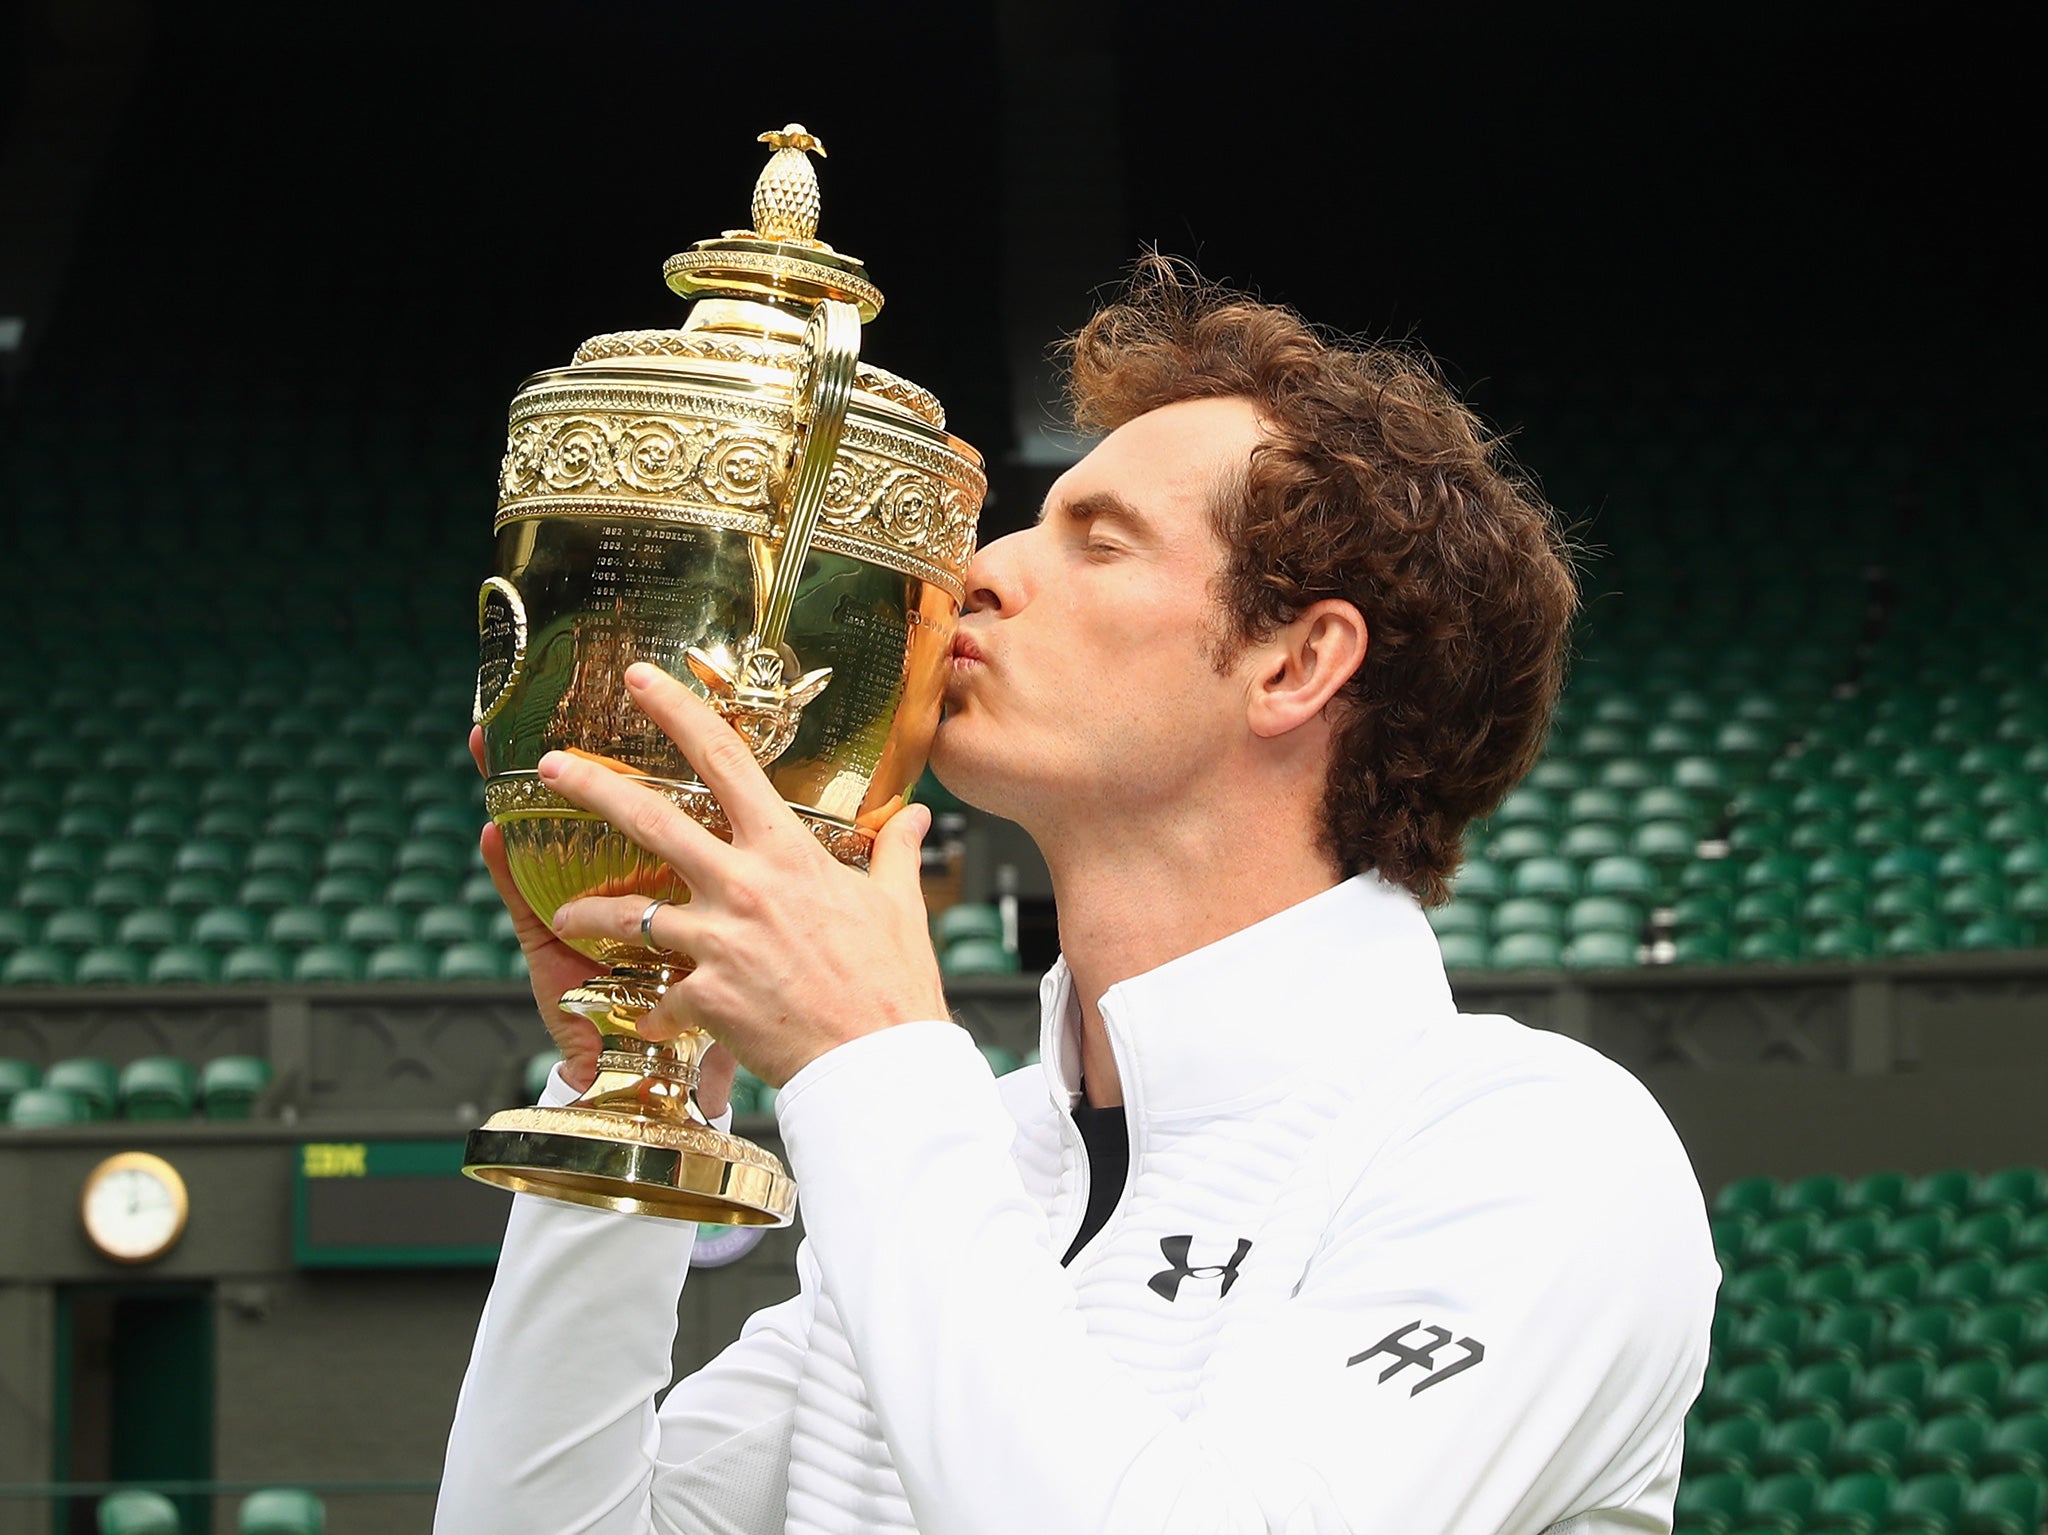 Murray with the Gentlemen's Singles Trophy at Centre Court on Monday